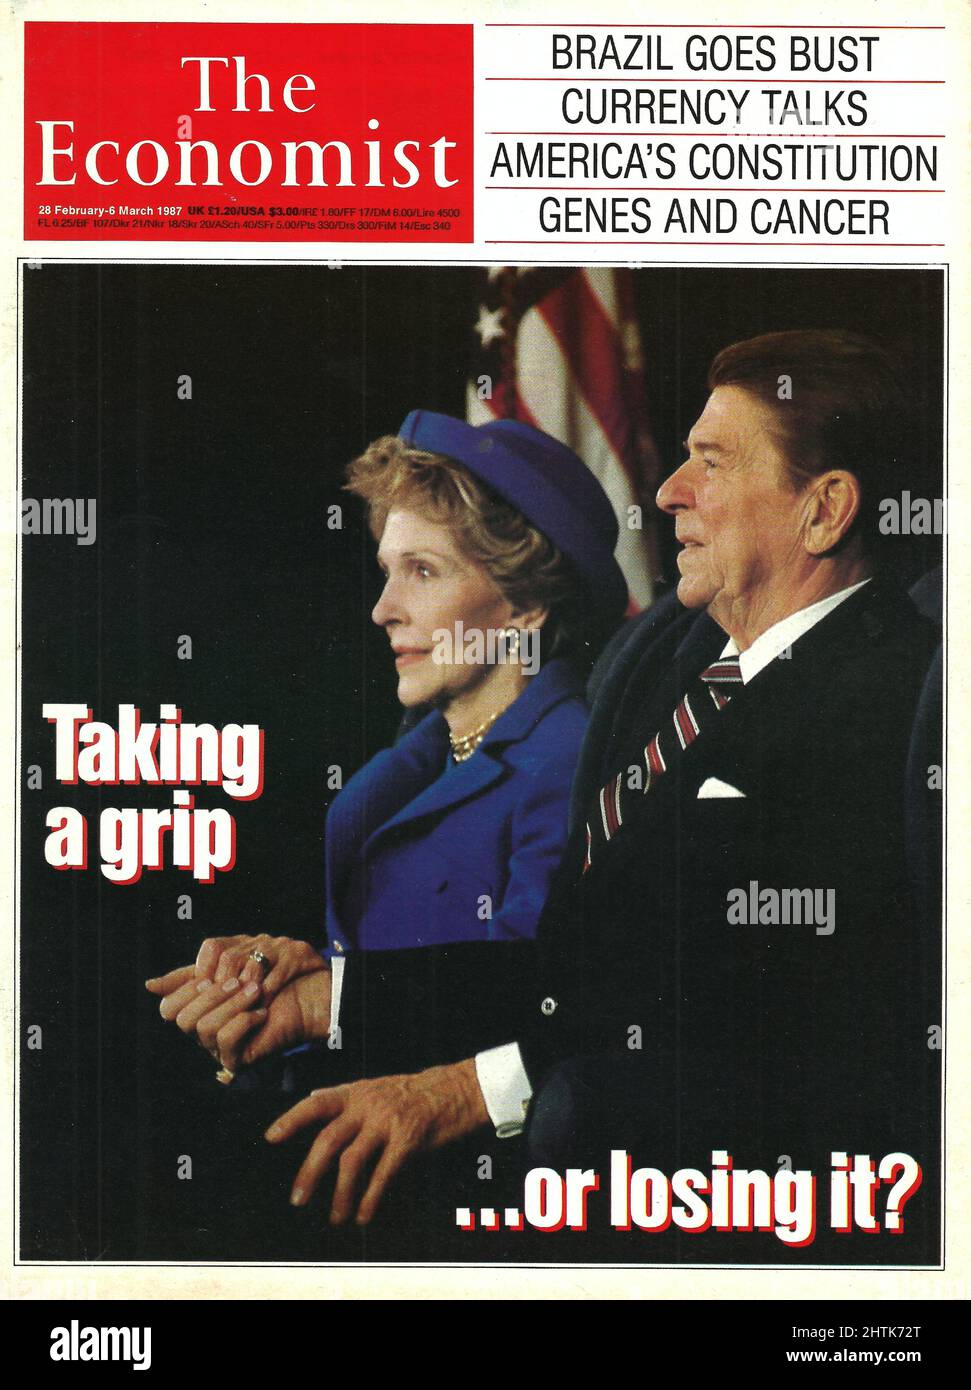 Front Cover of The Economist Front page of the Economist 28 February 6 March 1987 Ronald Reagan and Nancy Reagan Brasil goes bust Stock Photo